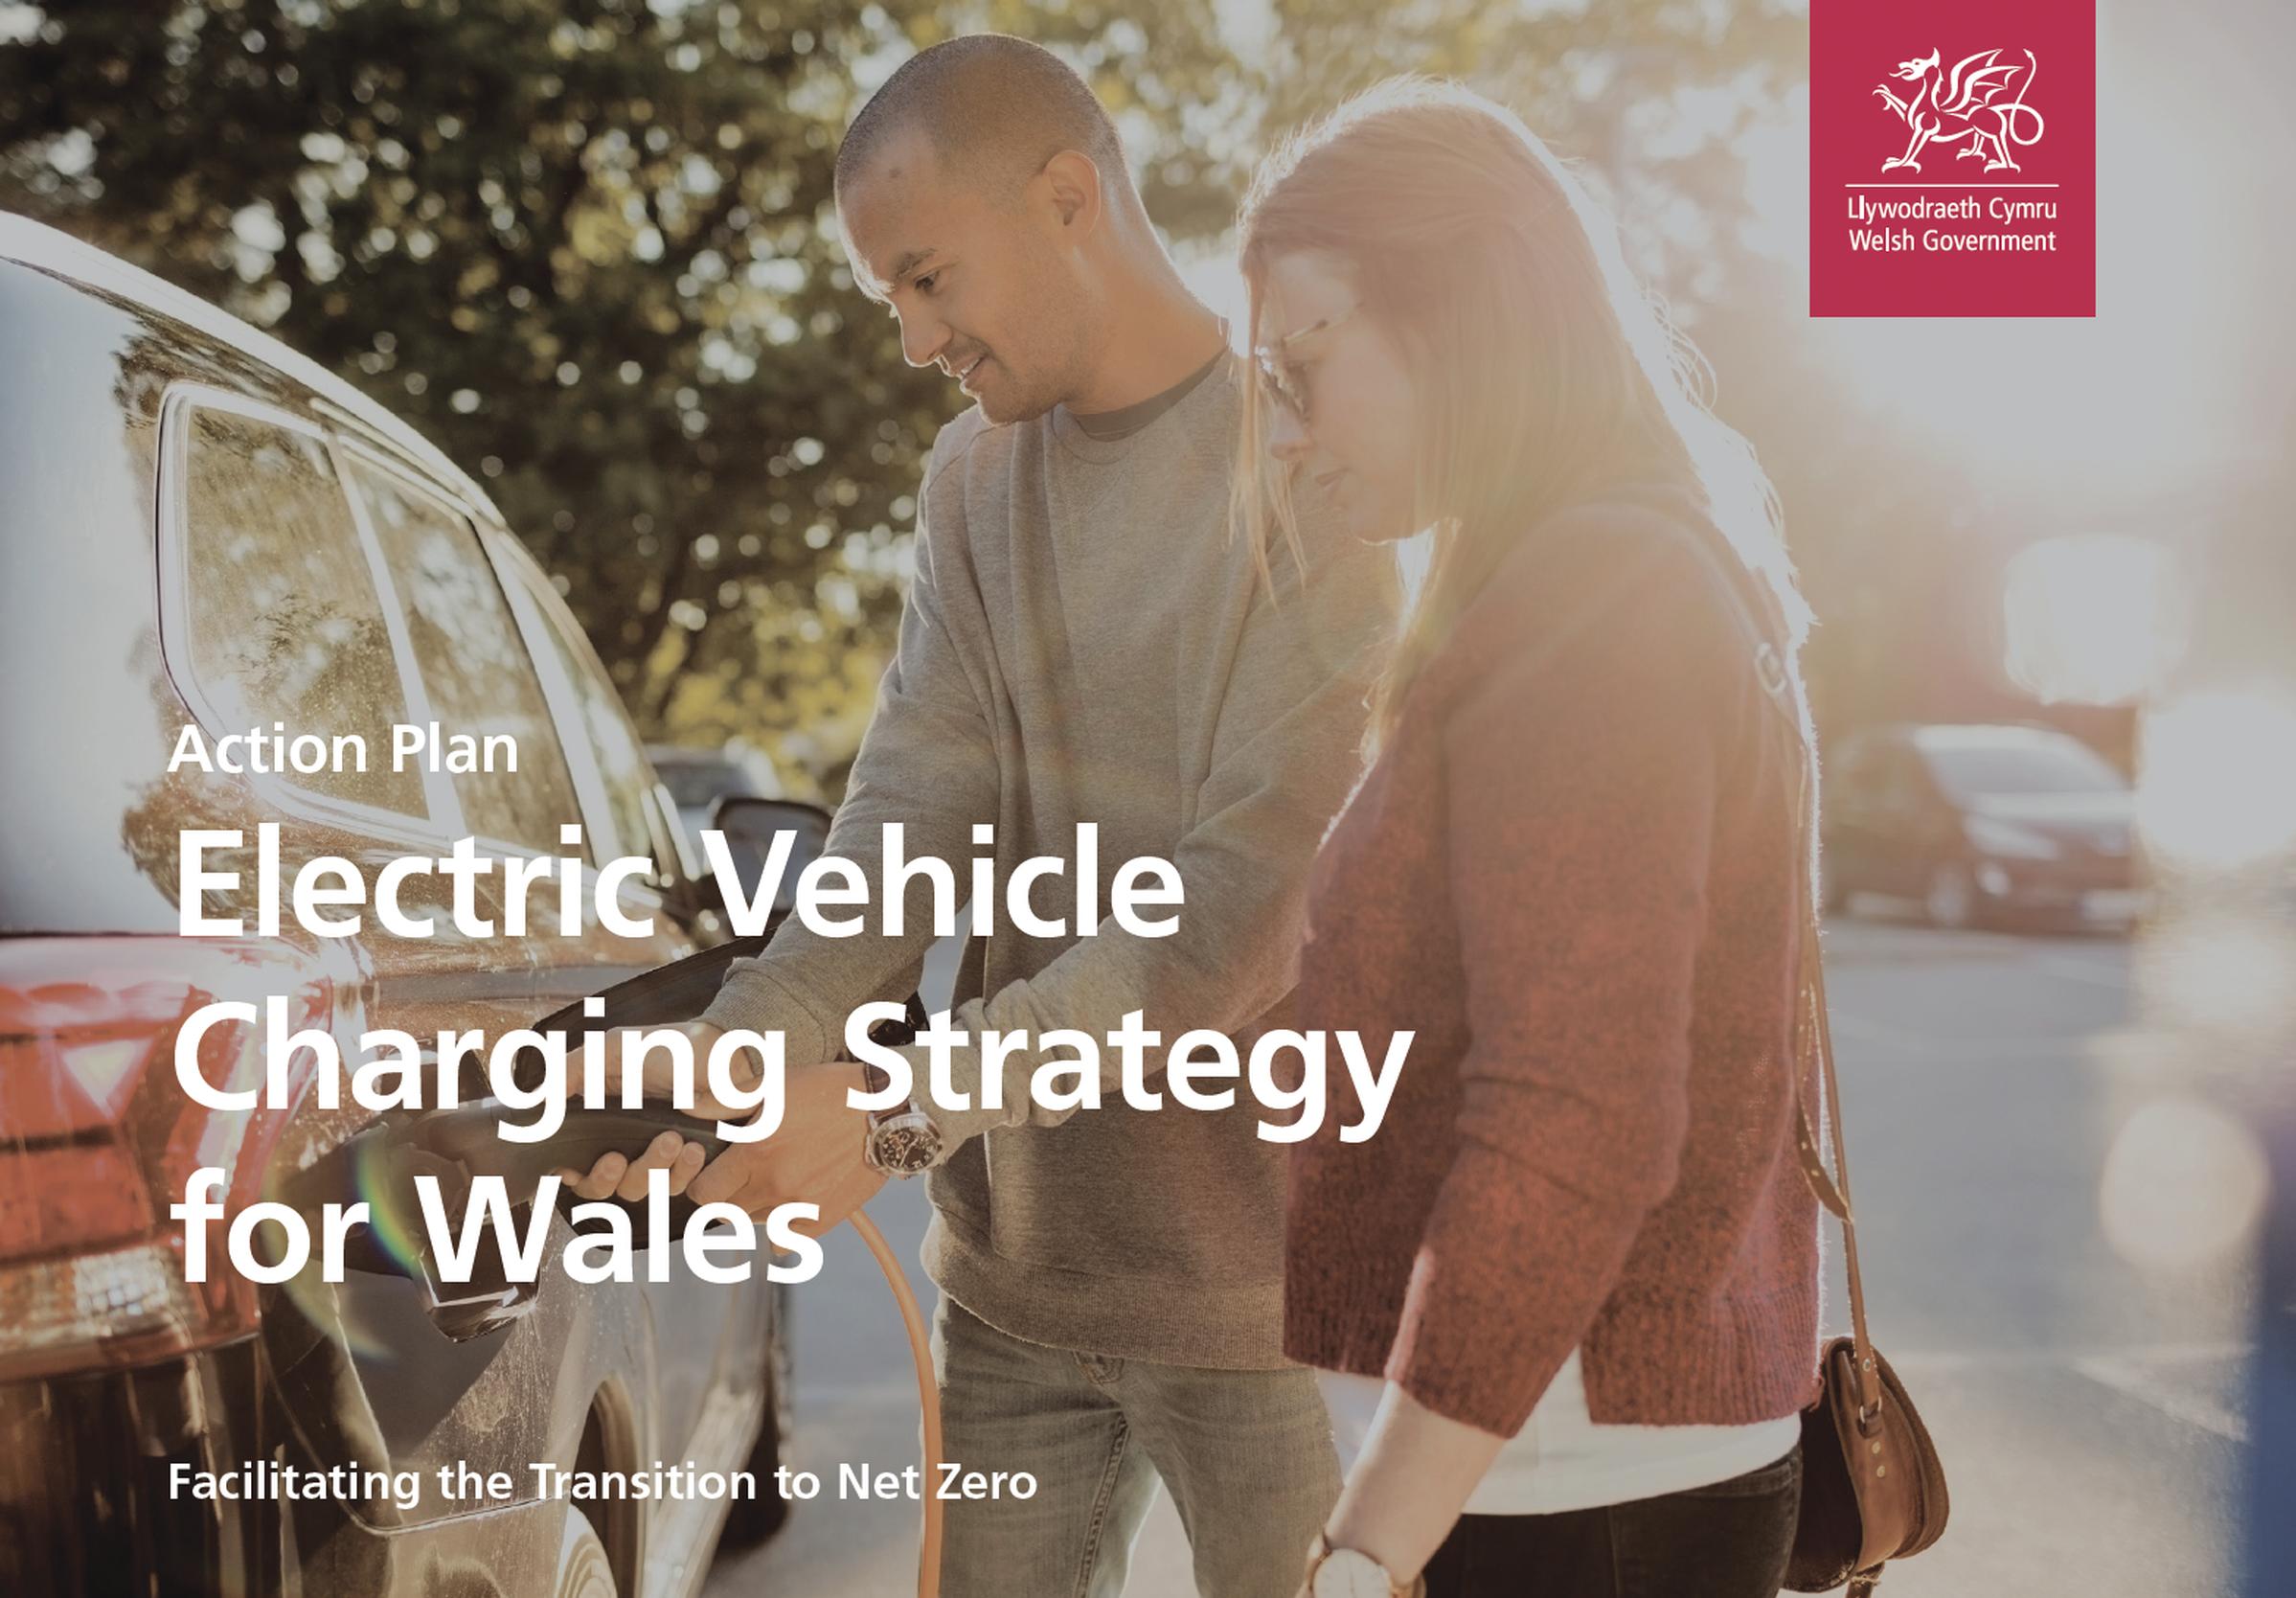 The EV Charging Strategy